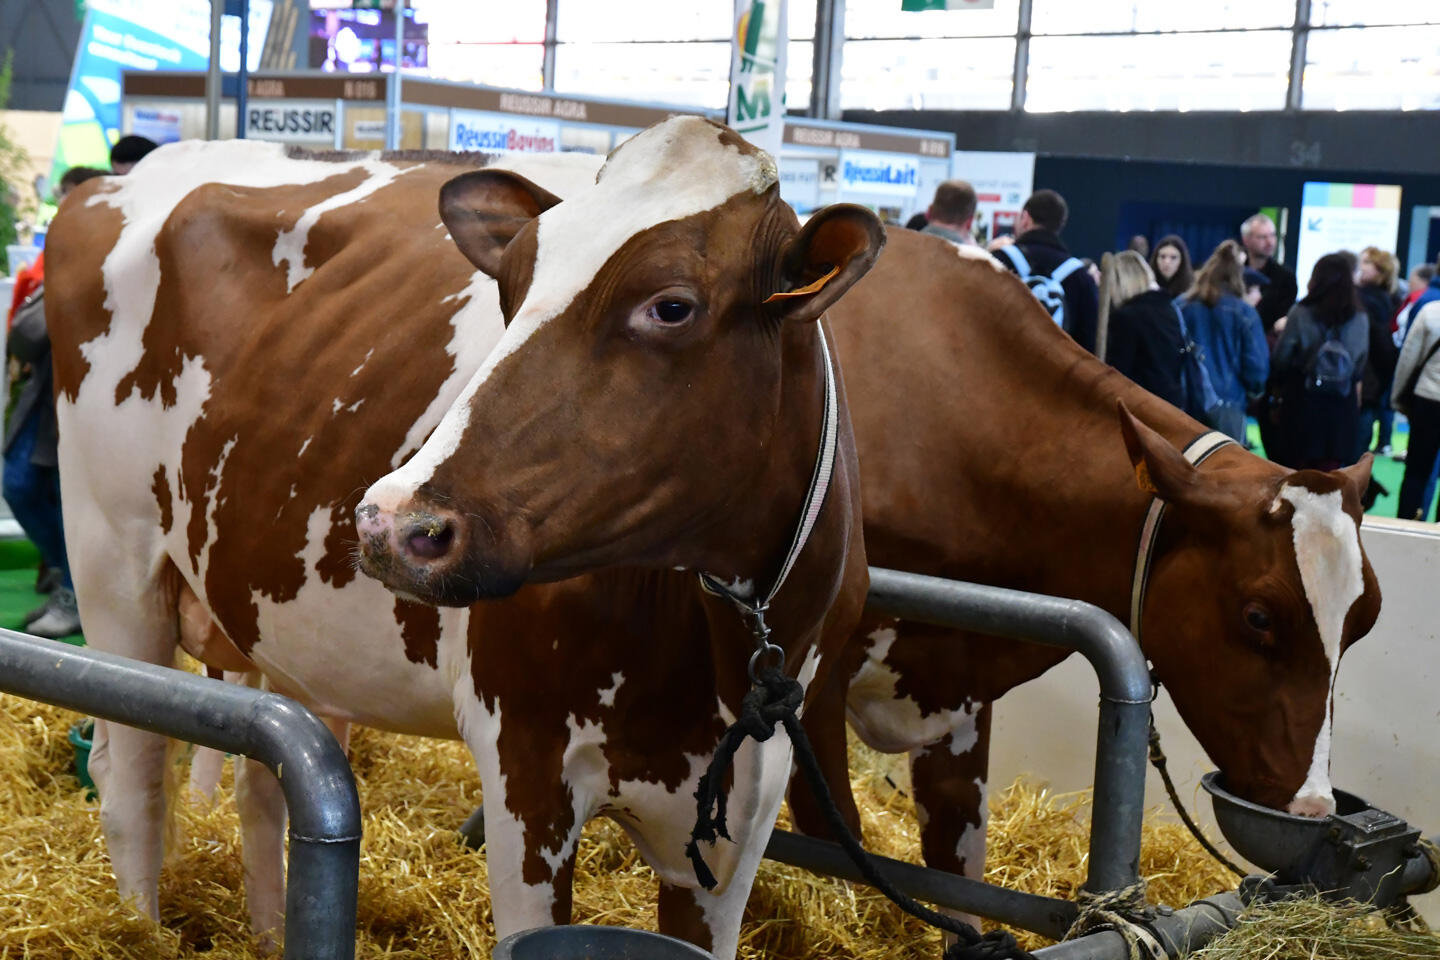 Cows at the Paris Agriculture Show with visitors in the background